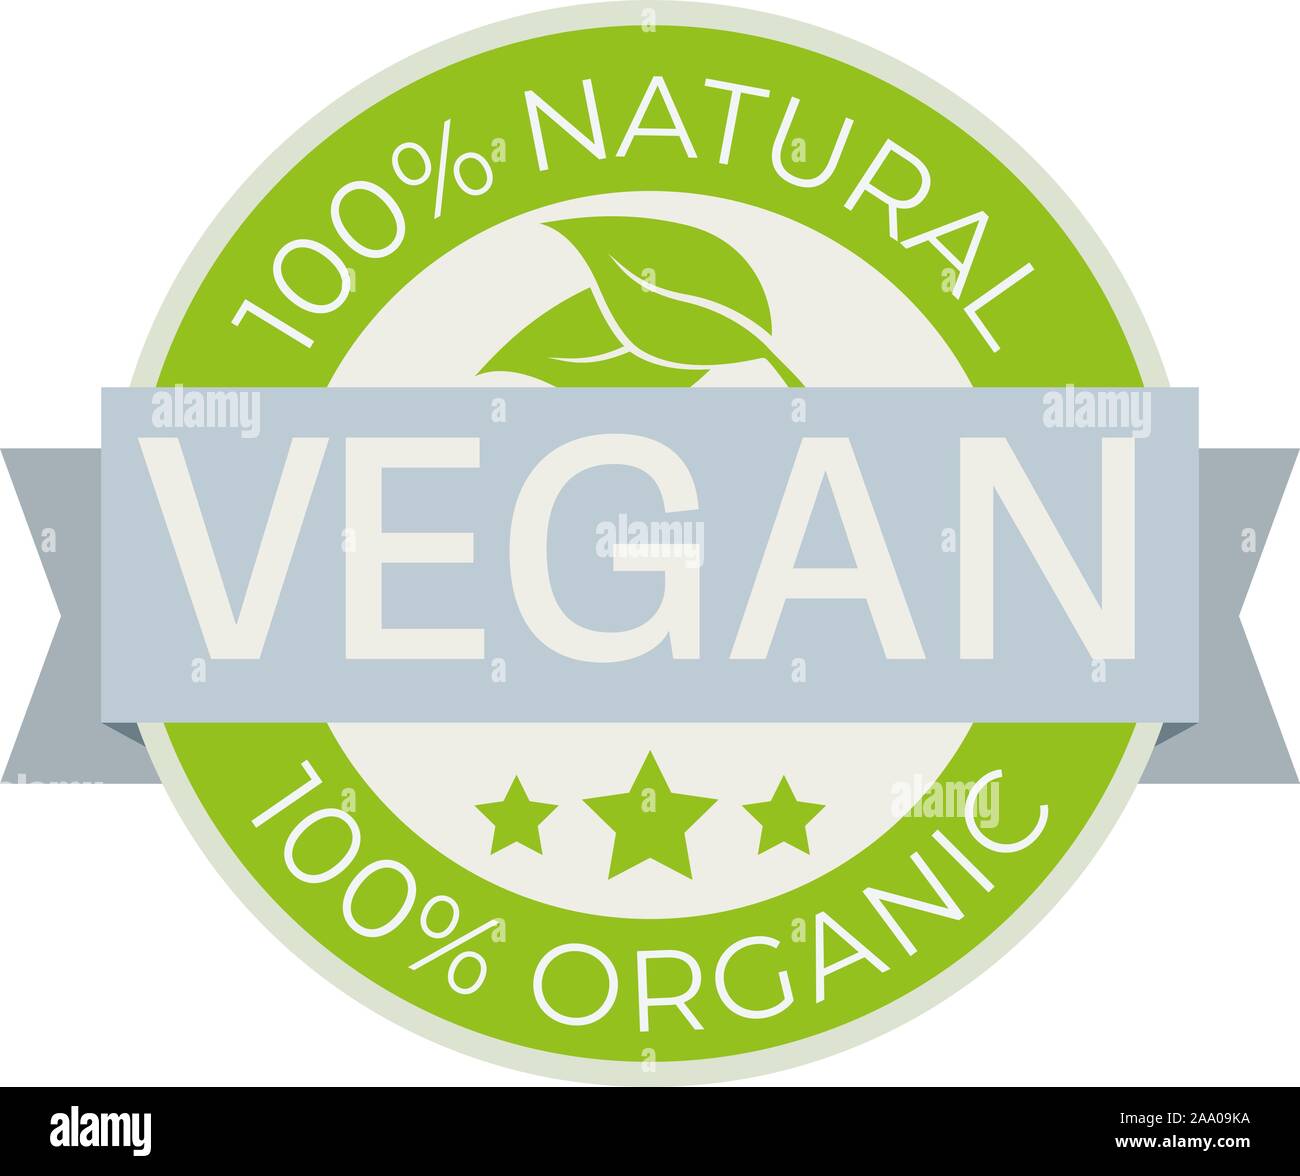 vegan food label with text 100 percent natural and organic vector illustration Stock Vector